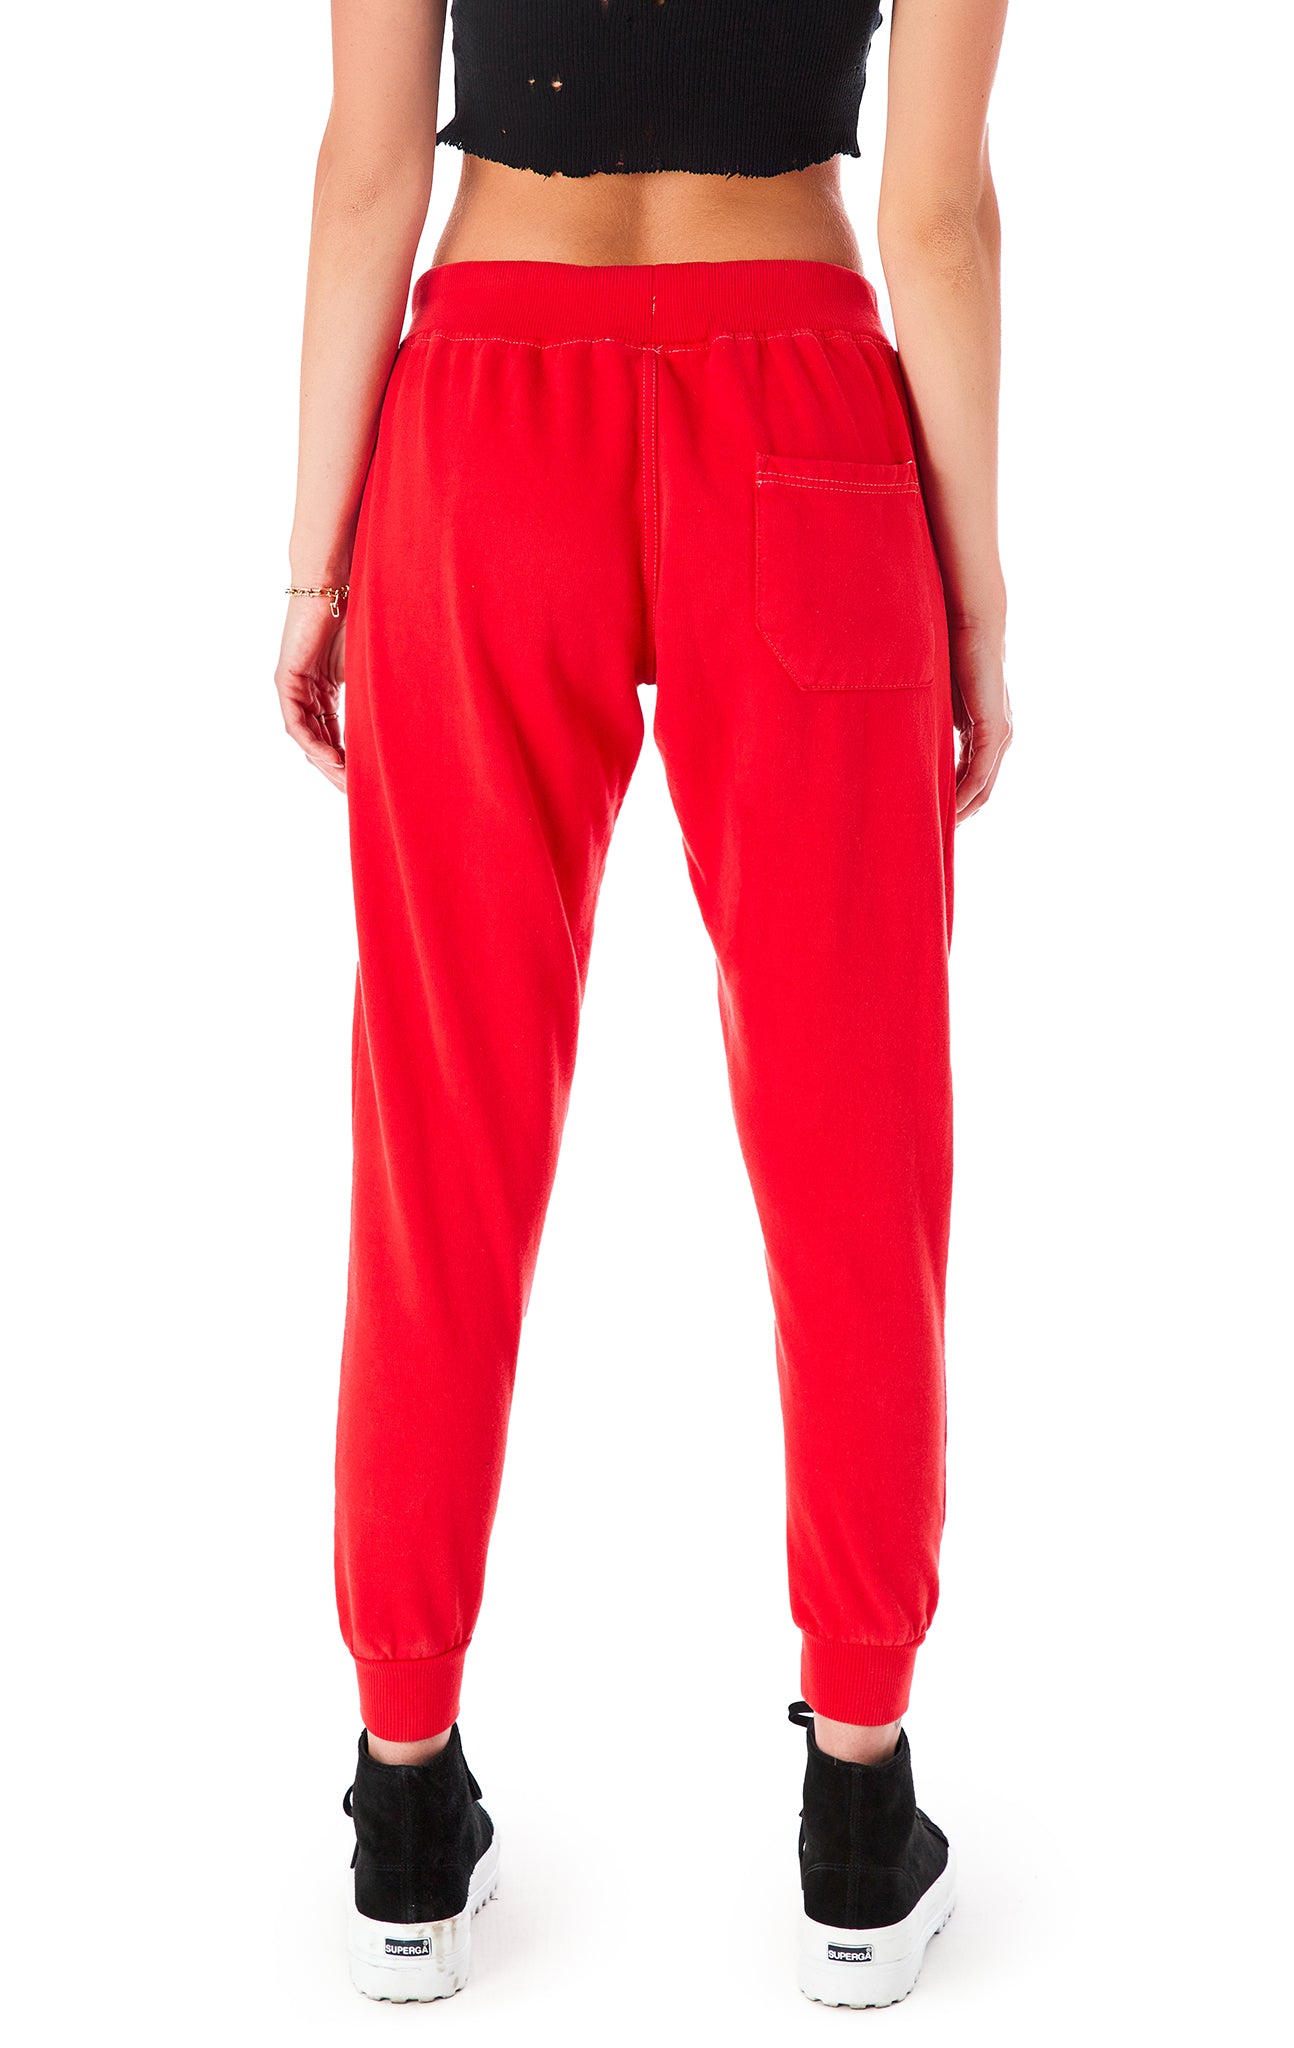 RED SWEATPANTS – LF Stores